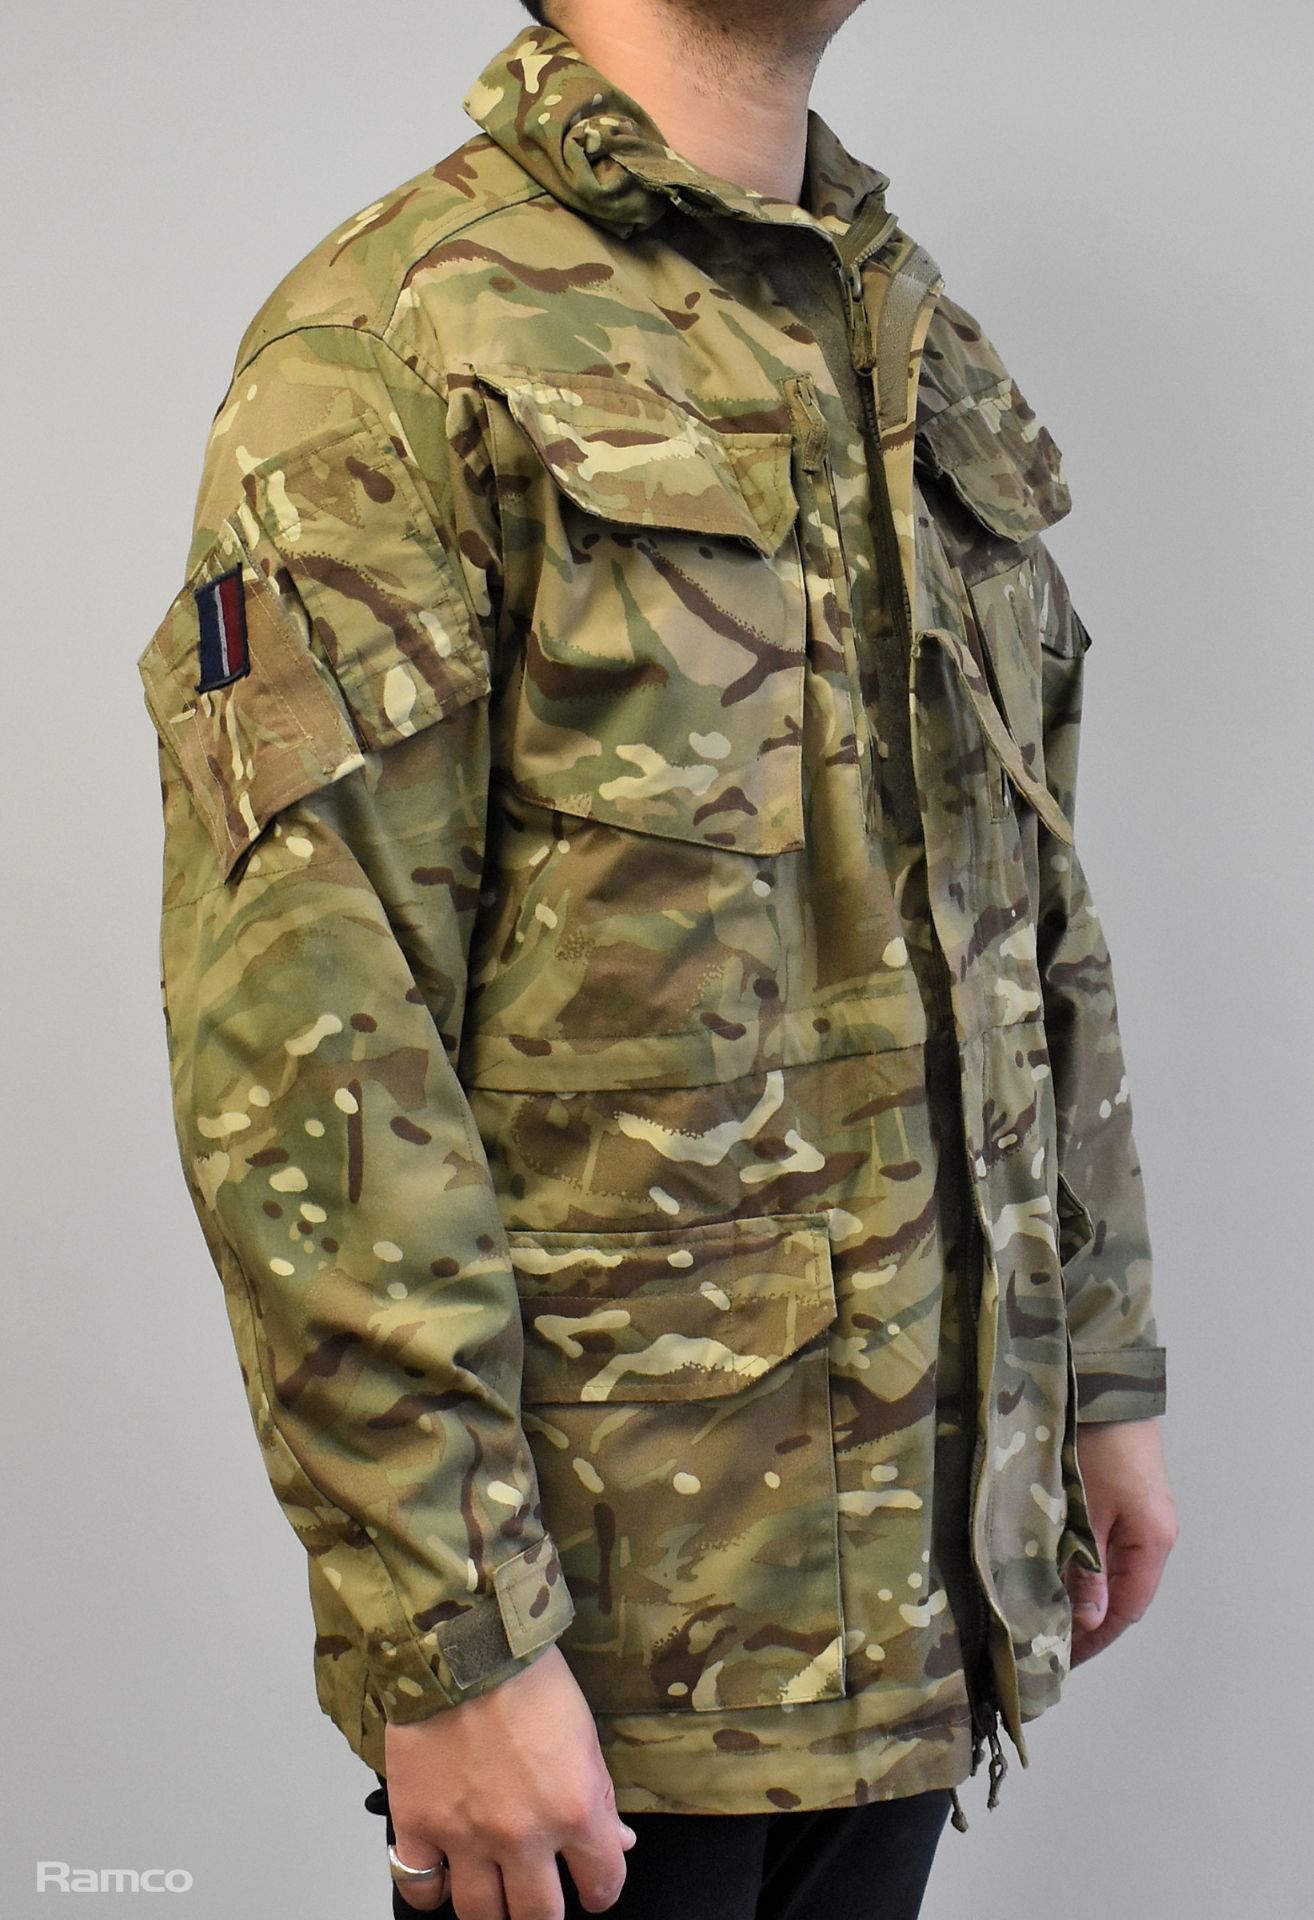 40x British Army MTP windproof smocks - mixed grades and sizes - Image 4 of 11